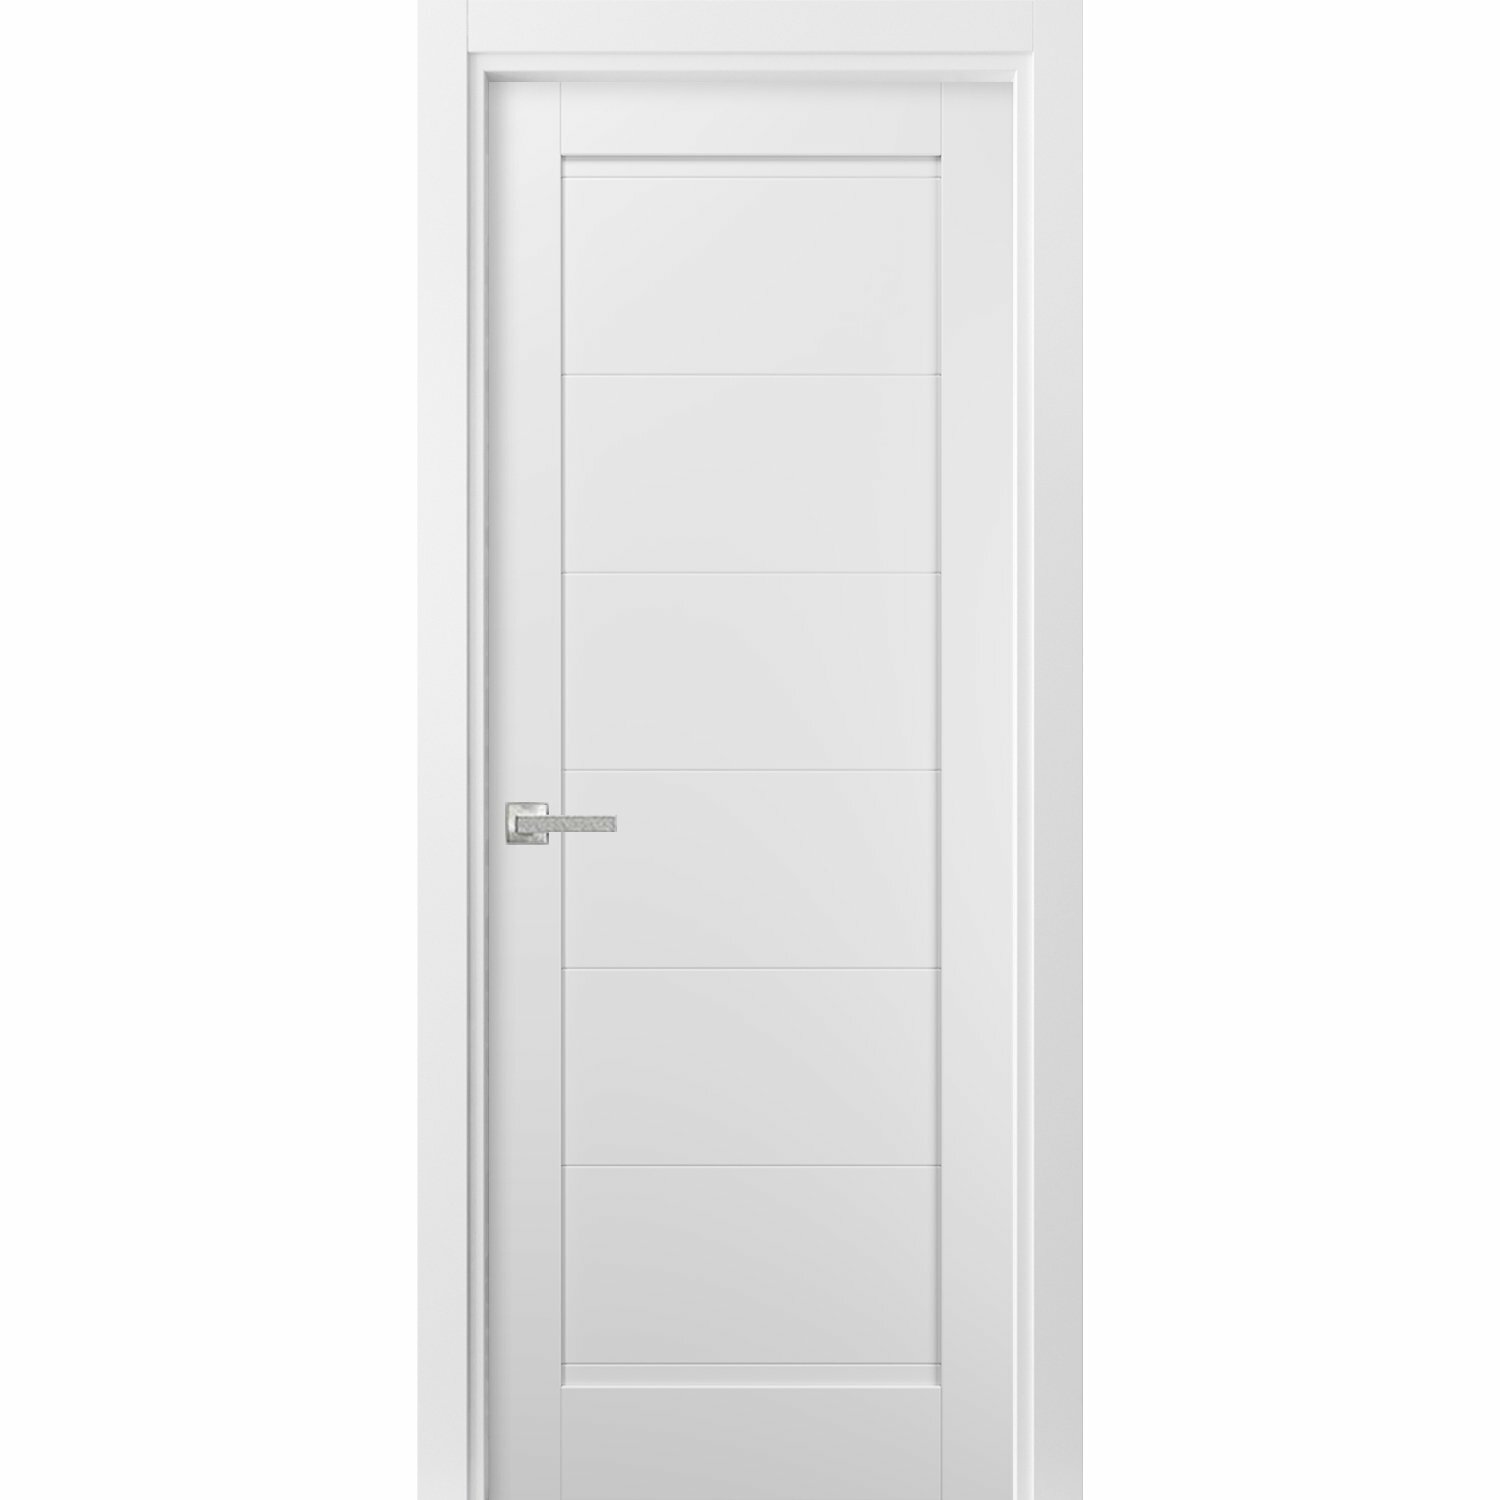 RELIABILT 34-in x 80-in Bright White Frosted Glass MDF Single Barn